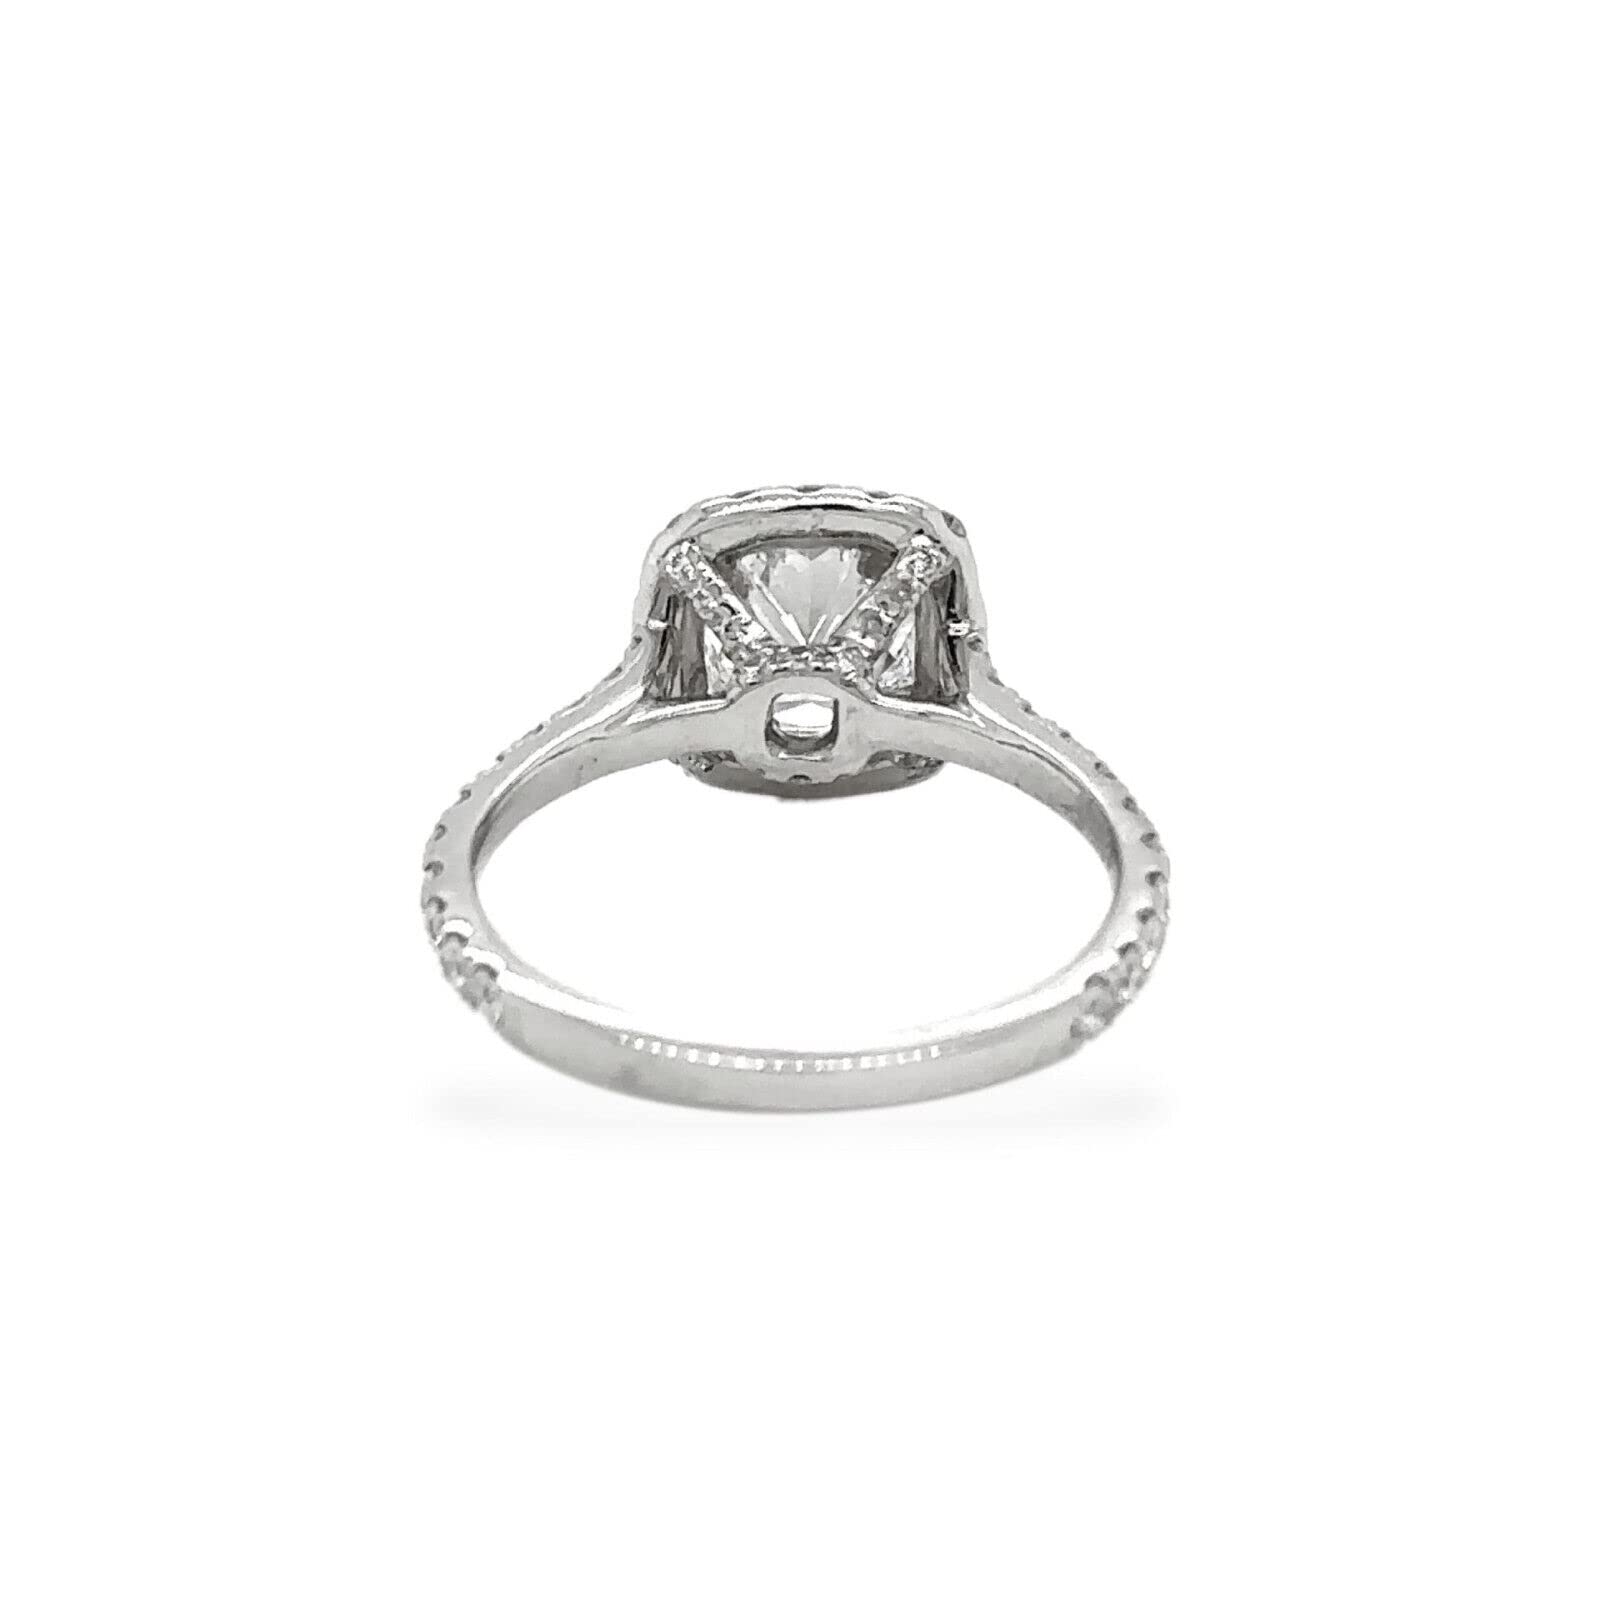 Diamond Cushion Cut 2.02 Carats Engagement Ring Platinum with GIA Certificate